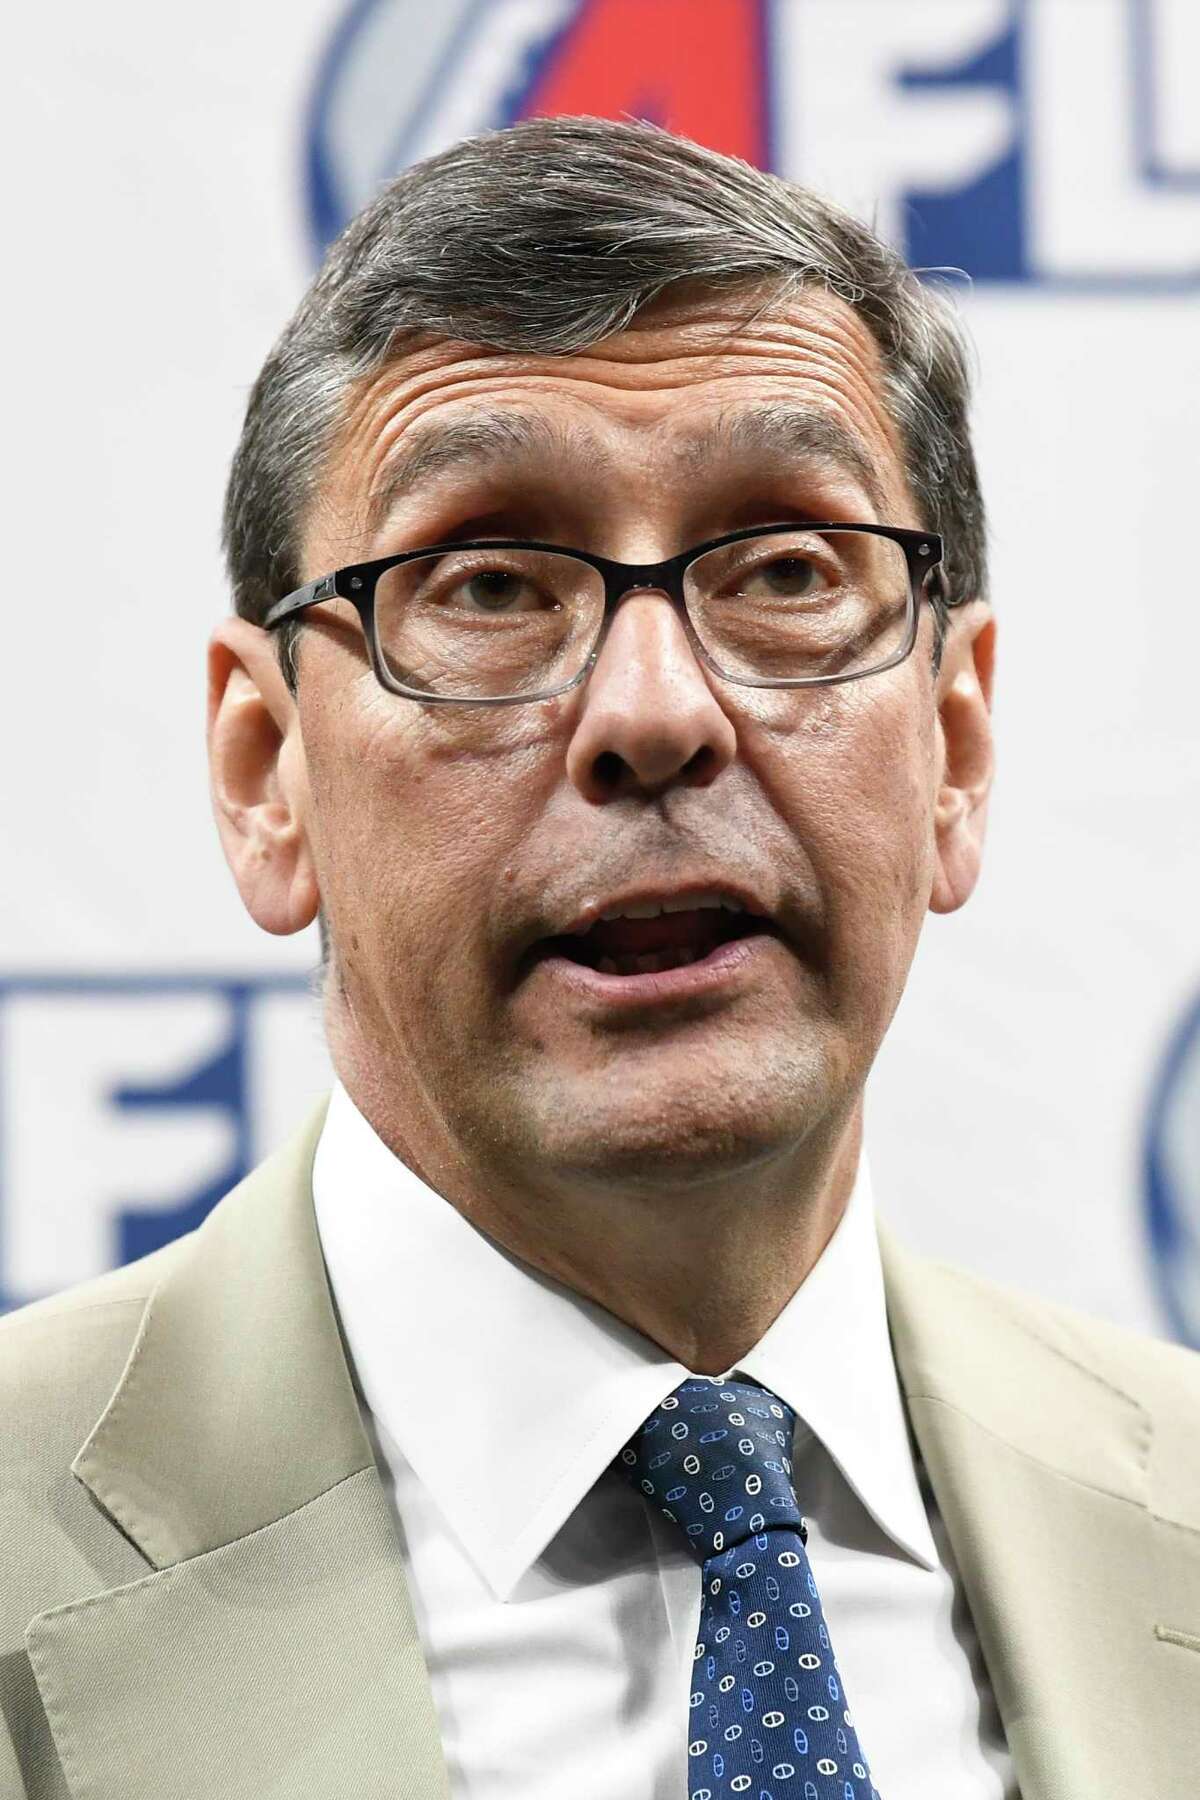 Arena Football League Commissioner Randall Boe speaks during the Arena Football League 2019 award ceremony at the Times Union Center, Saturday, Aug. 10, 2019, in Albany, N.Y. (Hans Pennink / Special to the Times Union)